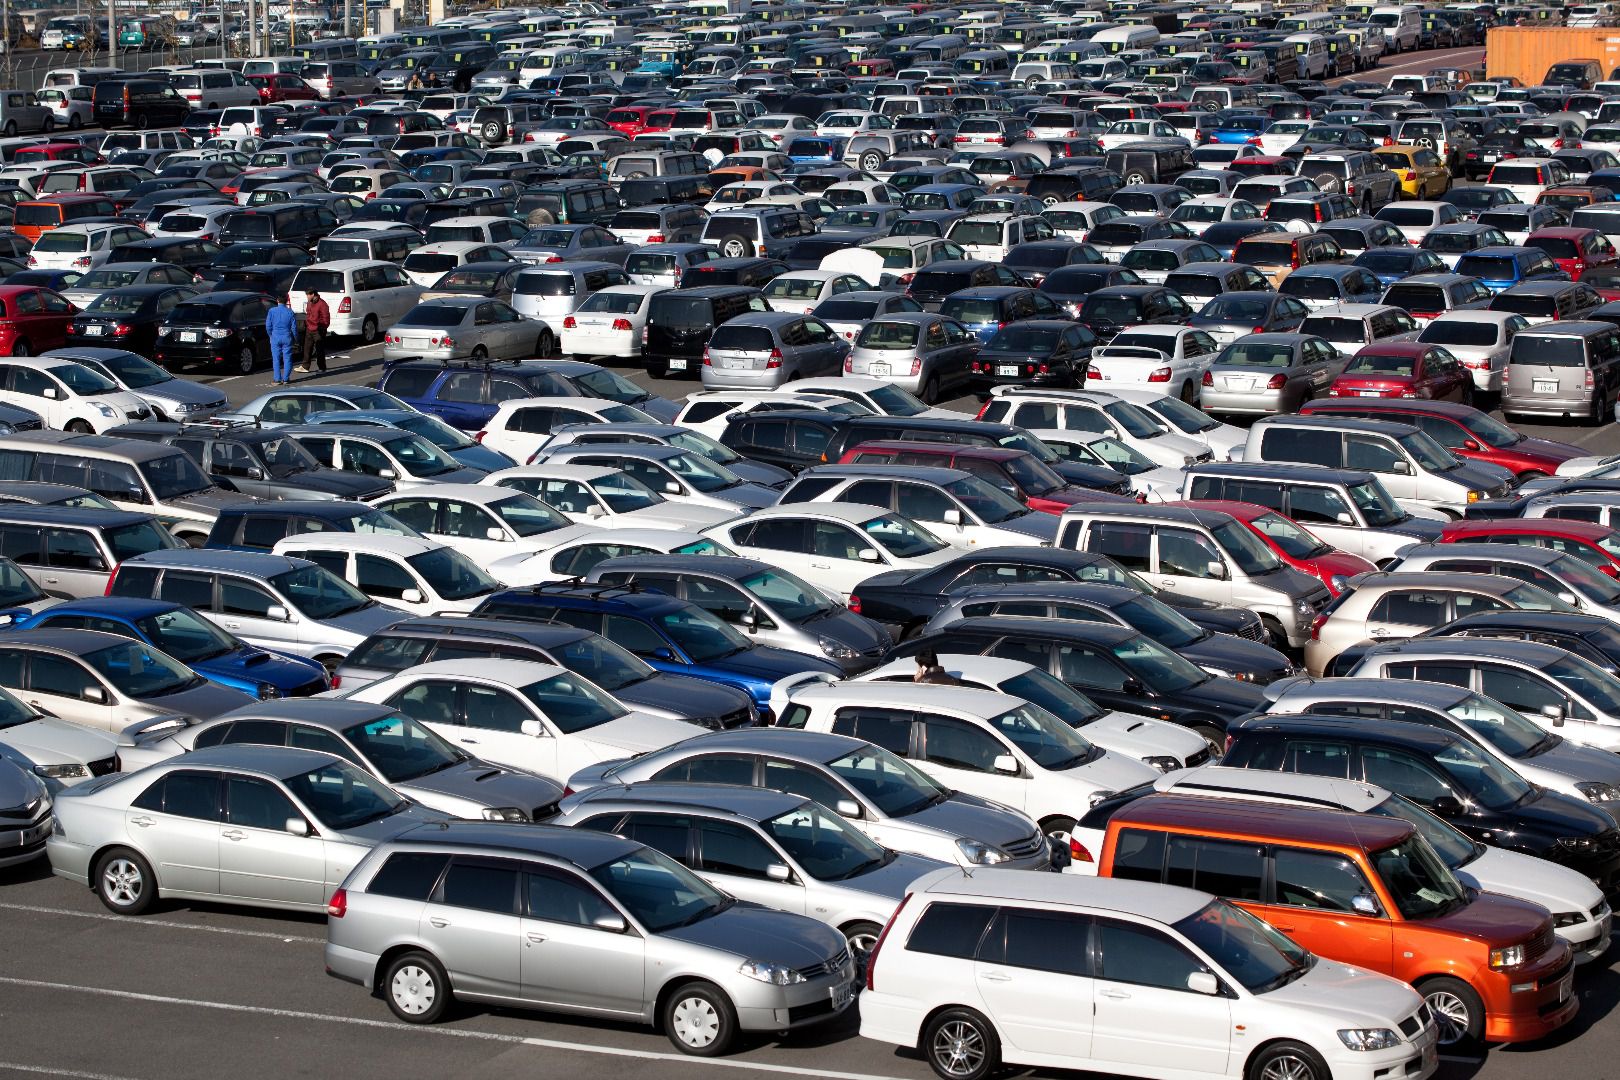 Used Car Pricing Guide: Assessing Risk and Value